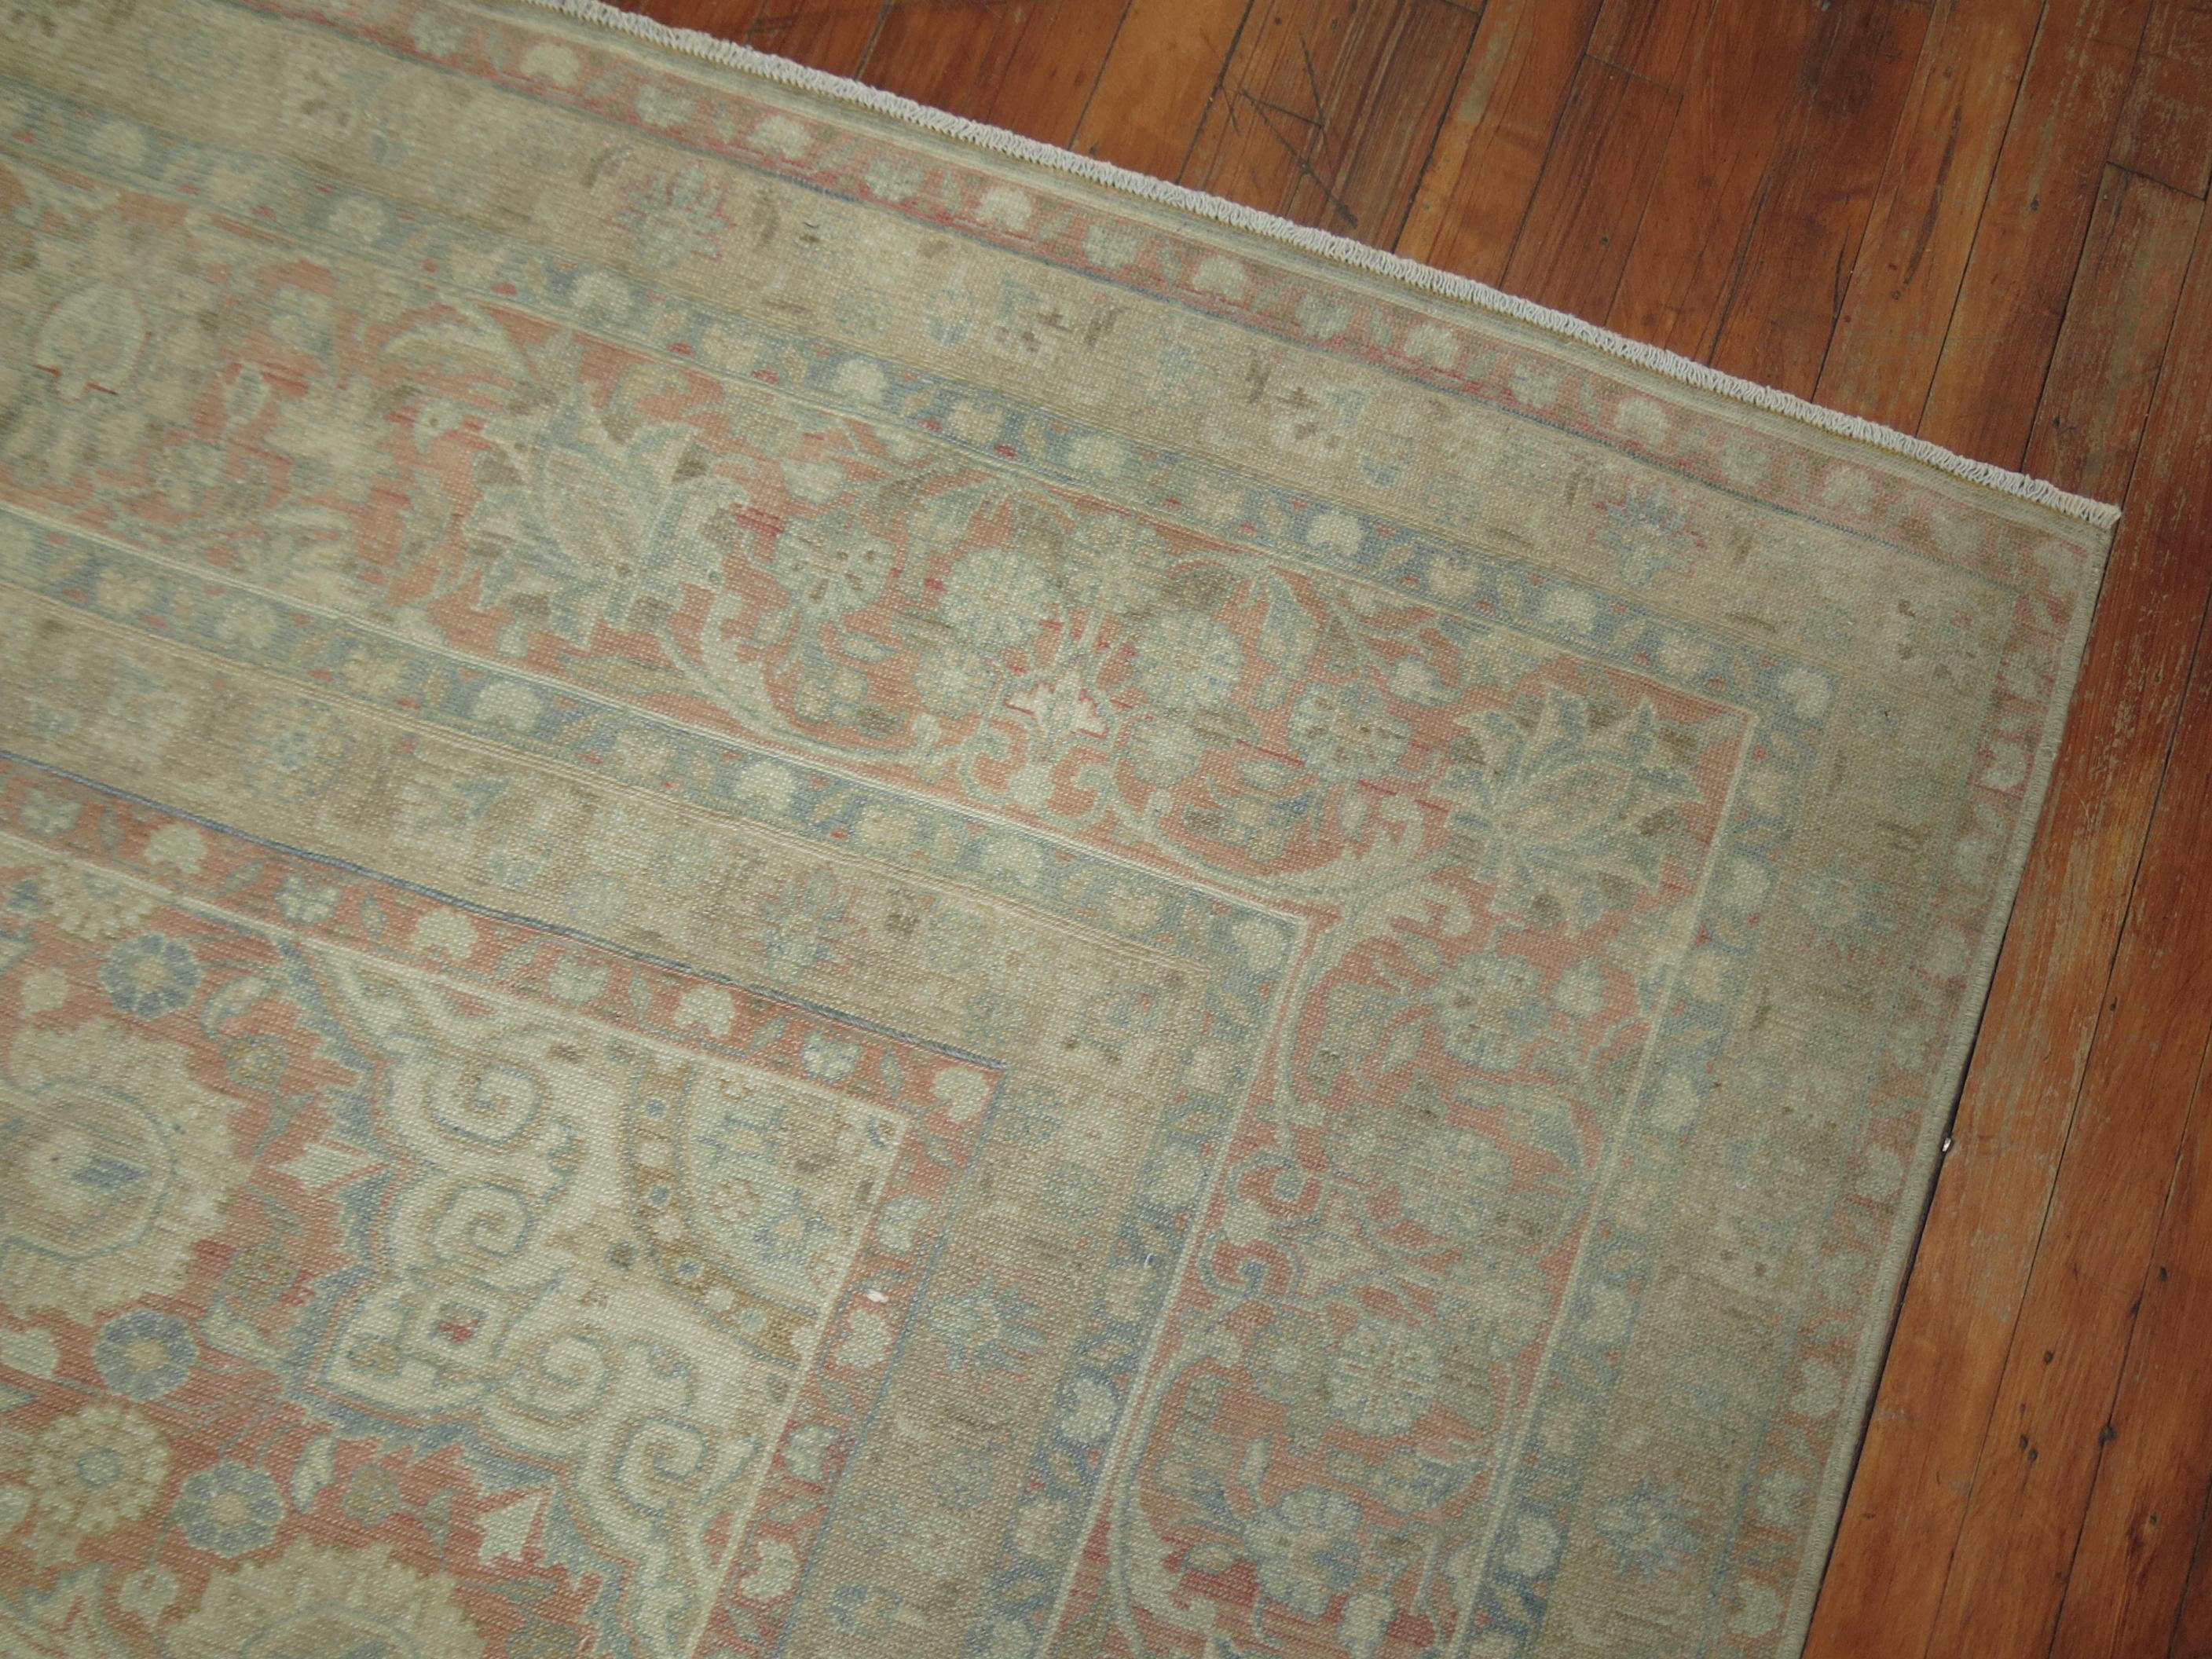 A room-size antique Persian Tabriz rug woven, early 20th century. Classic, Elegant, and the quality is there. the field is a light blue, small ivory medallion in the center of the field, accents in light brown, rosy pink.

Measures: 9'8